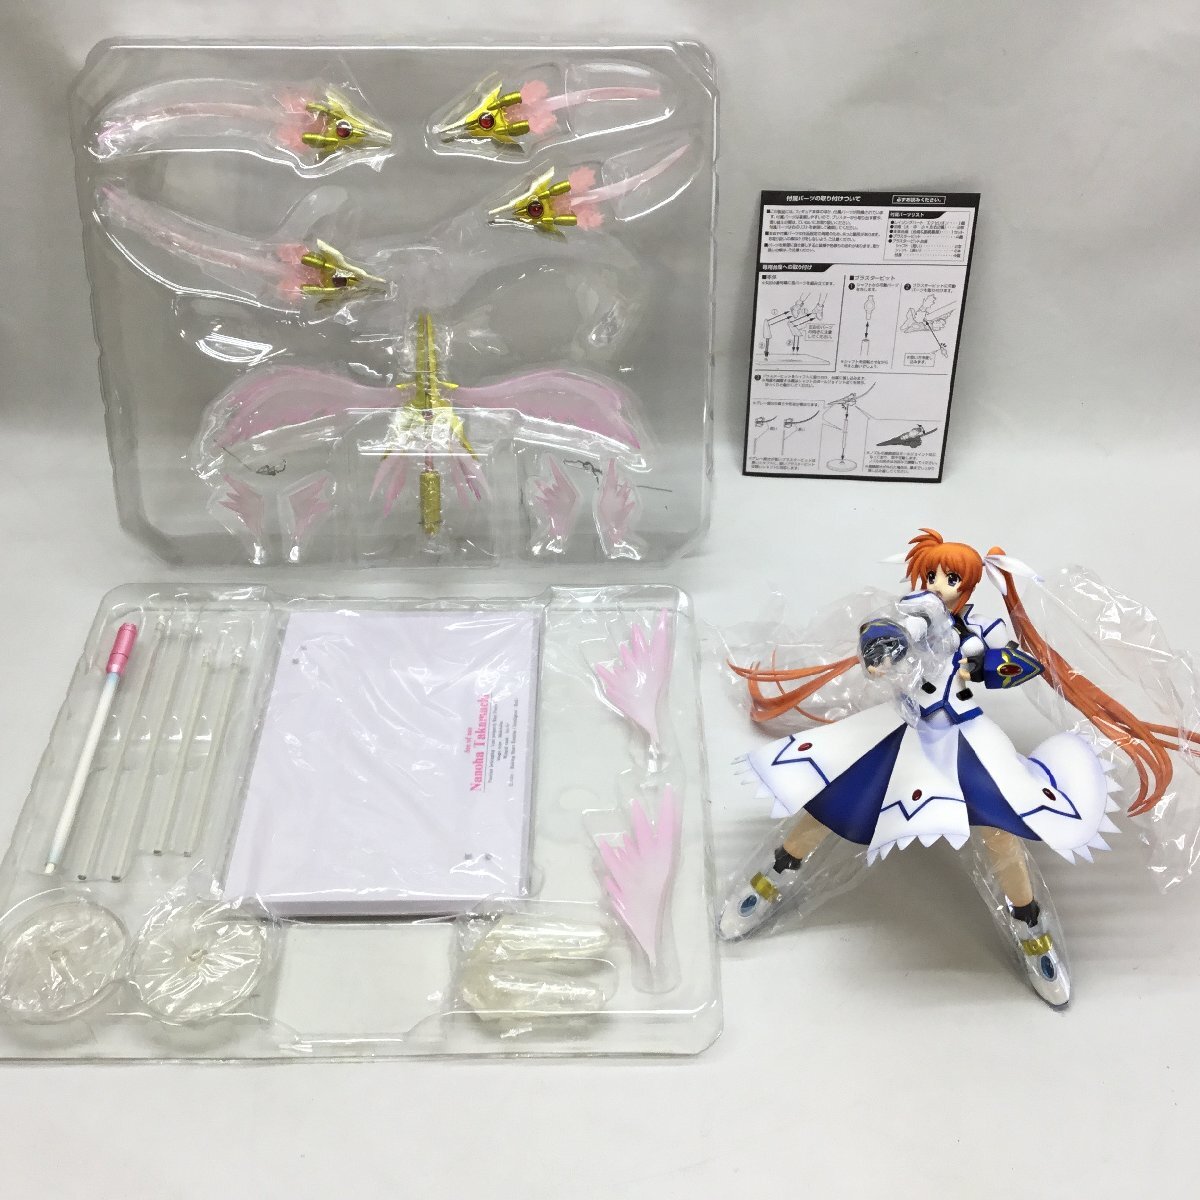 #ALTER Magical Girl Lyrical Nanoha large figure 1/7 scale 5 point set breaking the seal settled goods /7.74kg